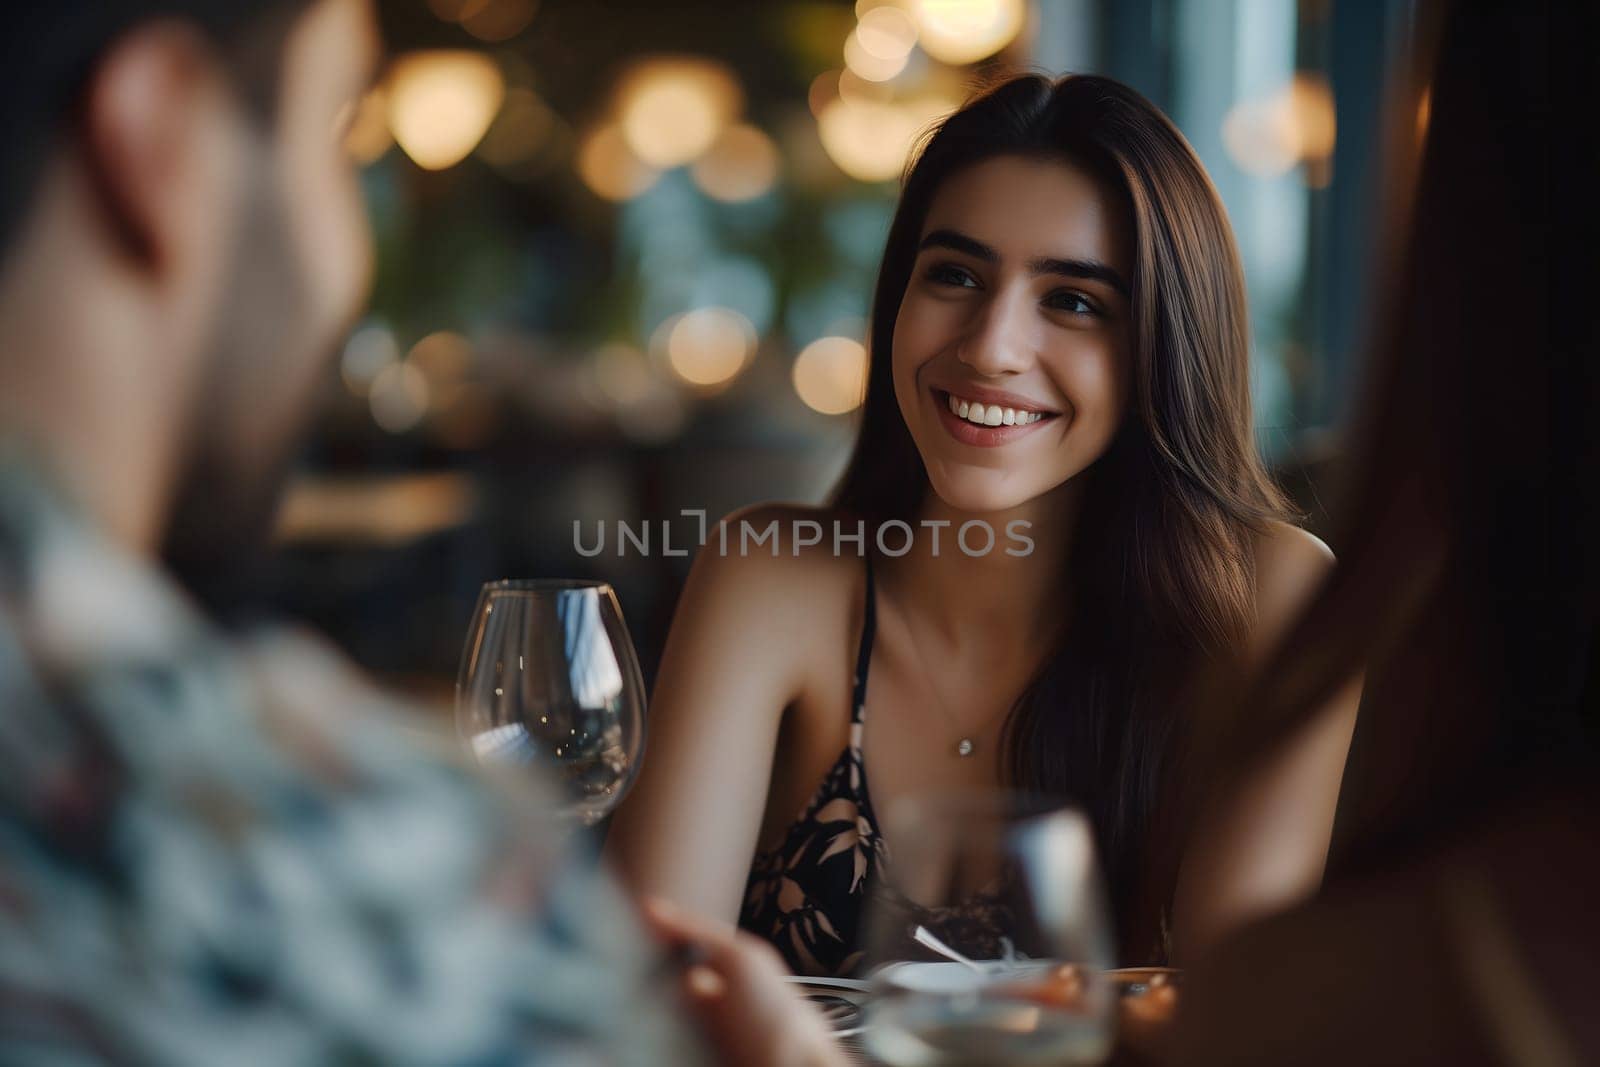 Smiling young adult woman dating with young adult man at the restaurant. Neural network generated image. Not based on any actual scene or pattern.